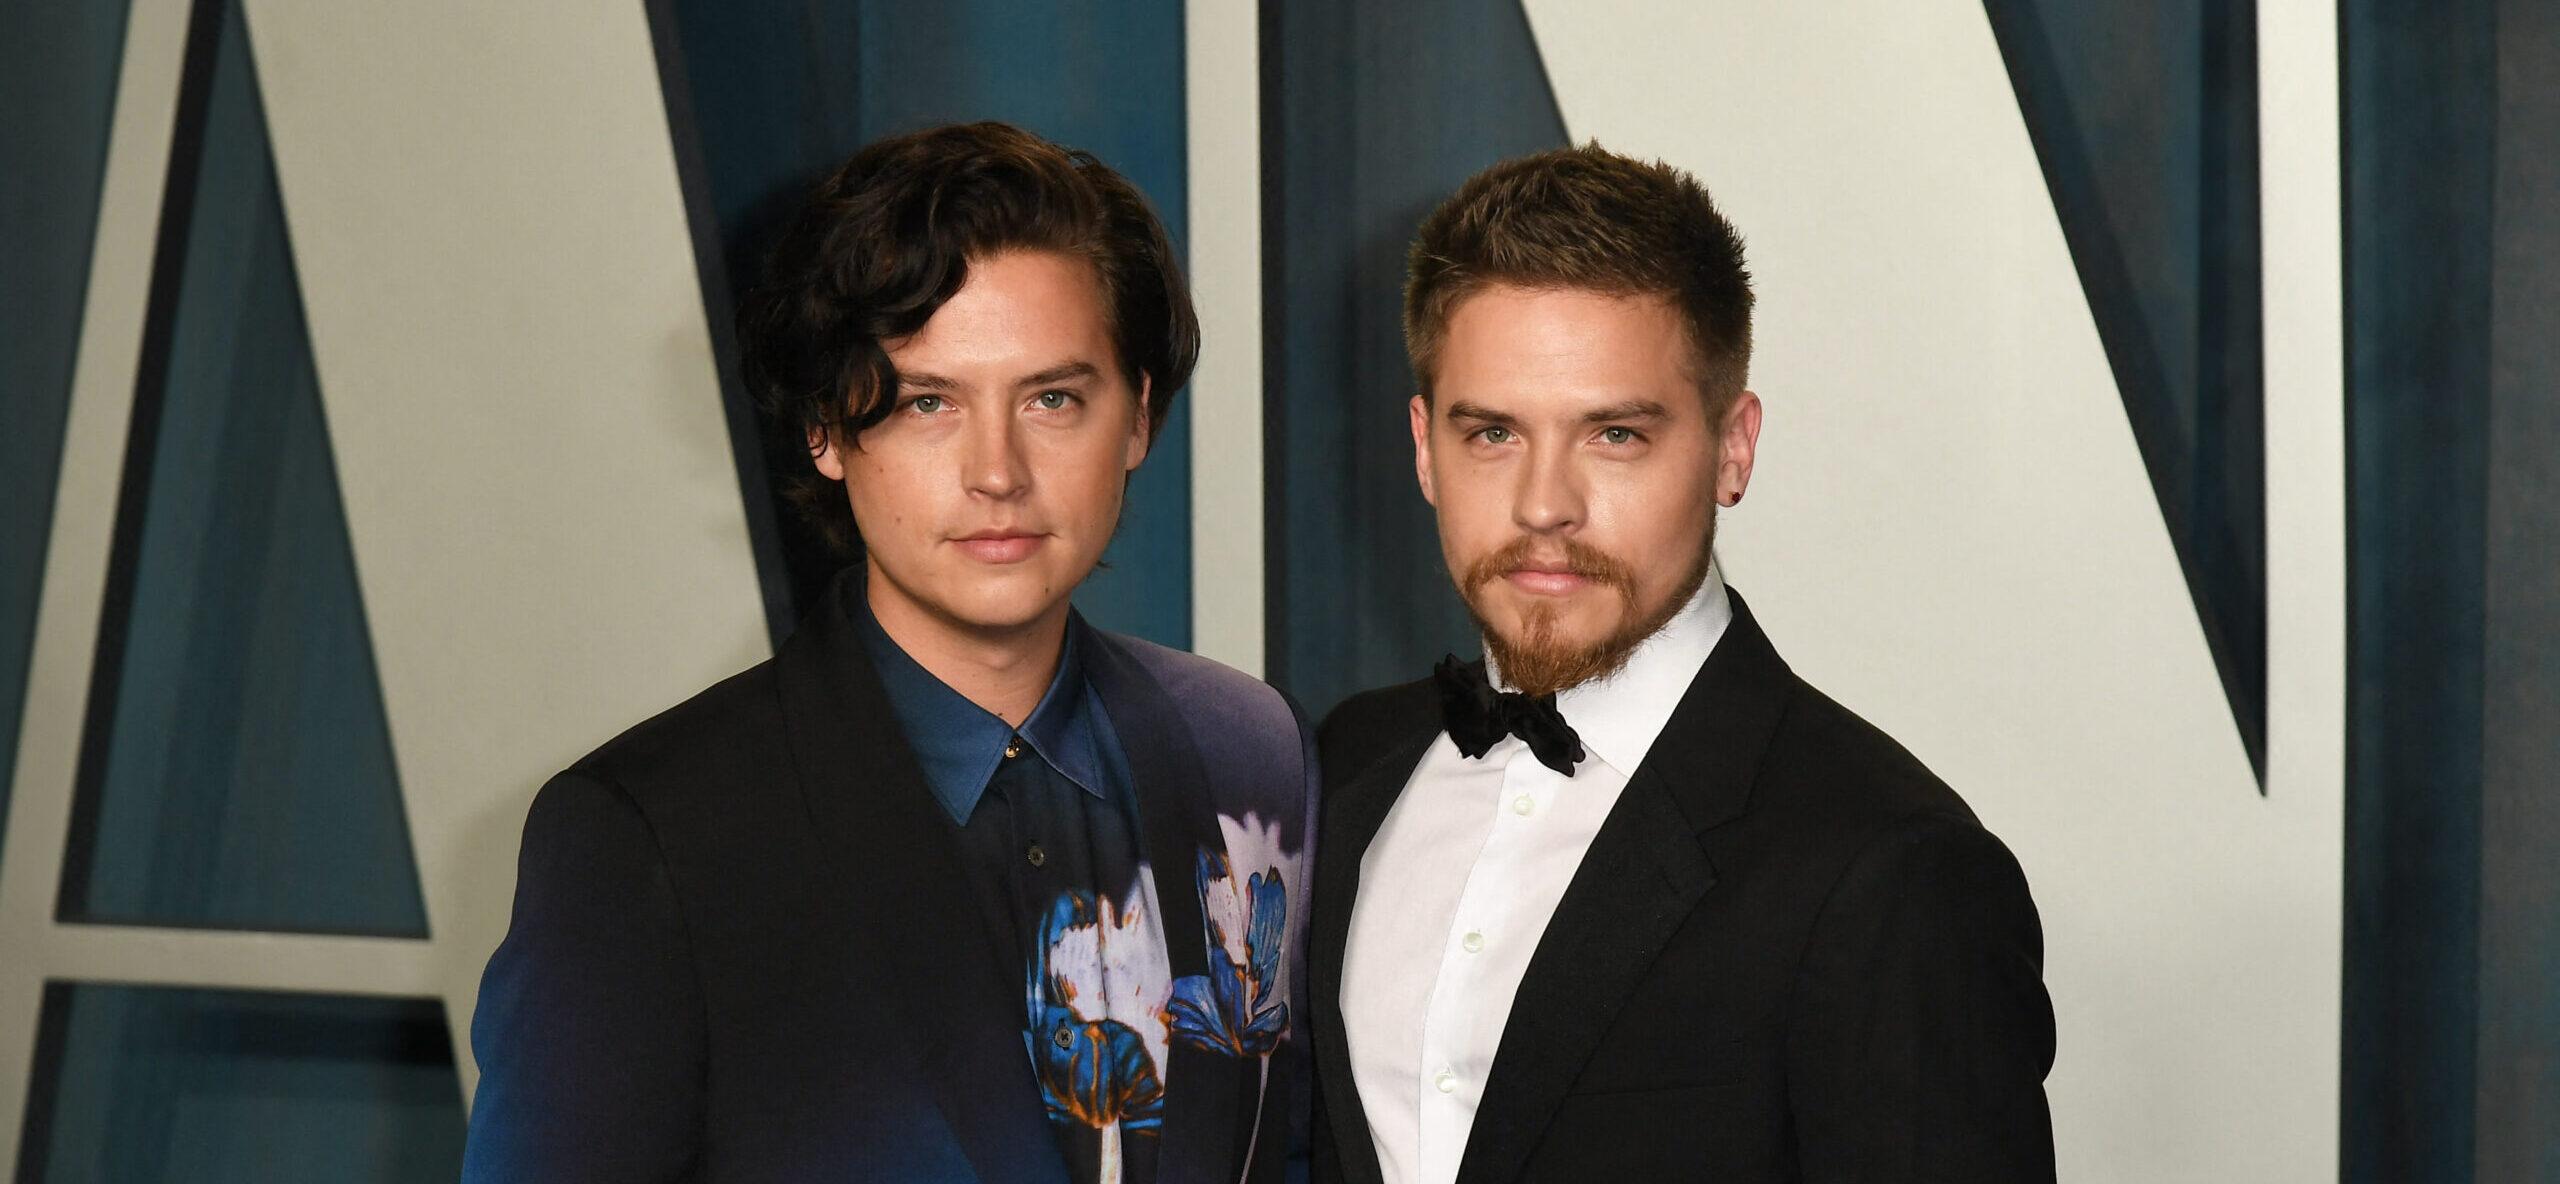 Dylan Sprouse’s Sweet Words To Cole Sprouse As ‘Riverdale’ Ends